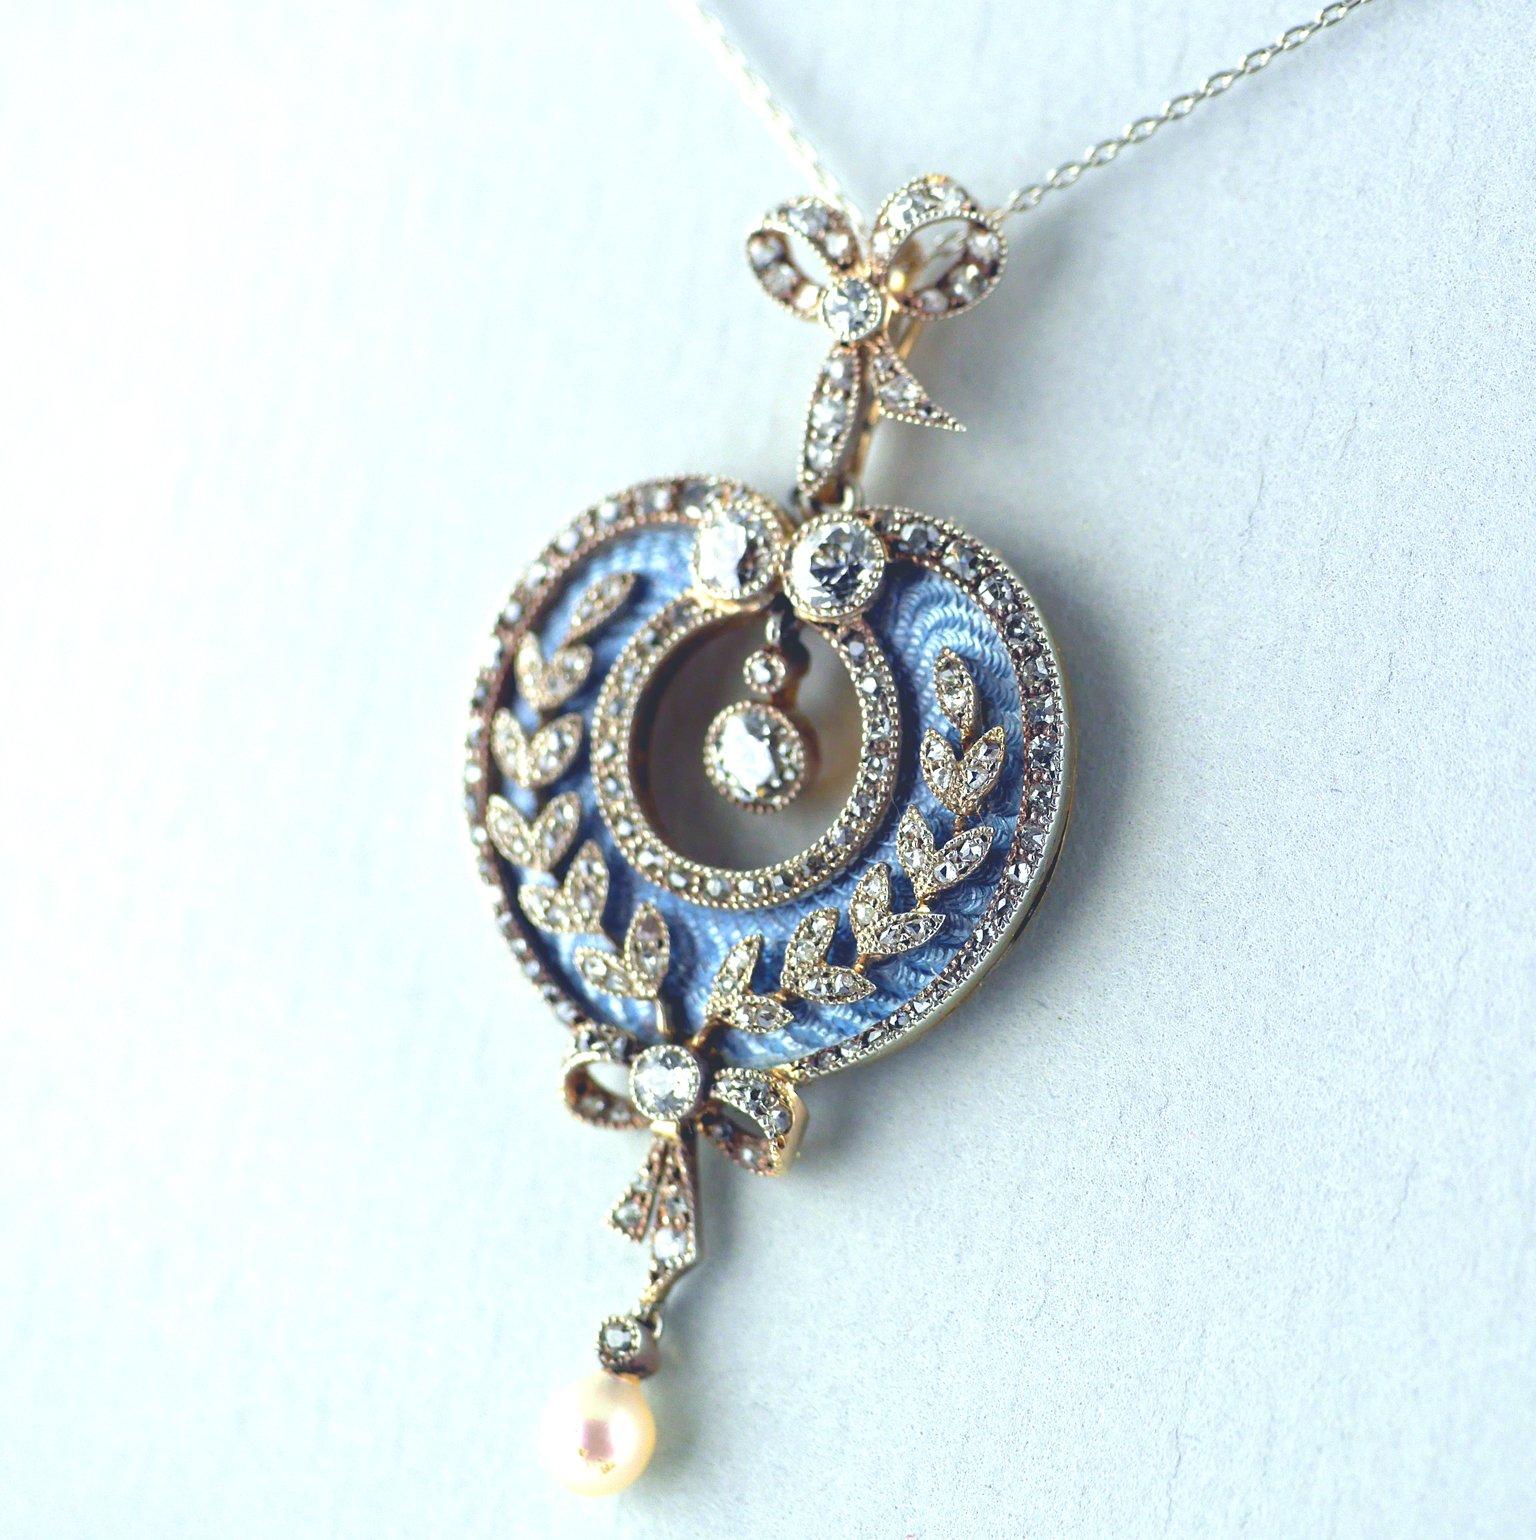 An exquisite, rare and fine Belle Epoque pendant in 18 carat gold and platinum, circa 1900 with a detachable brooch fitting. 

18 carat gold and platinum set heart shaped centre with a diamond foliate overlay on engine turned, pale blue, translucent